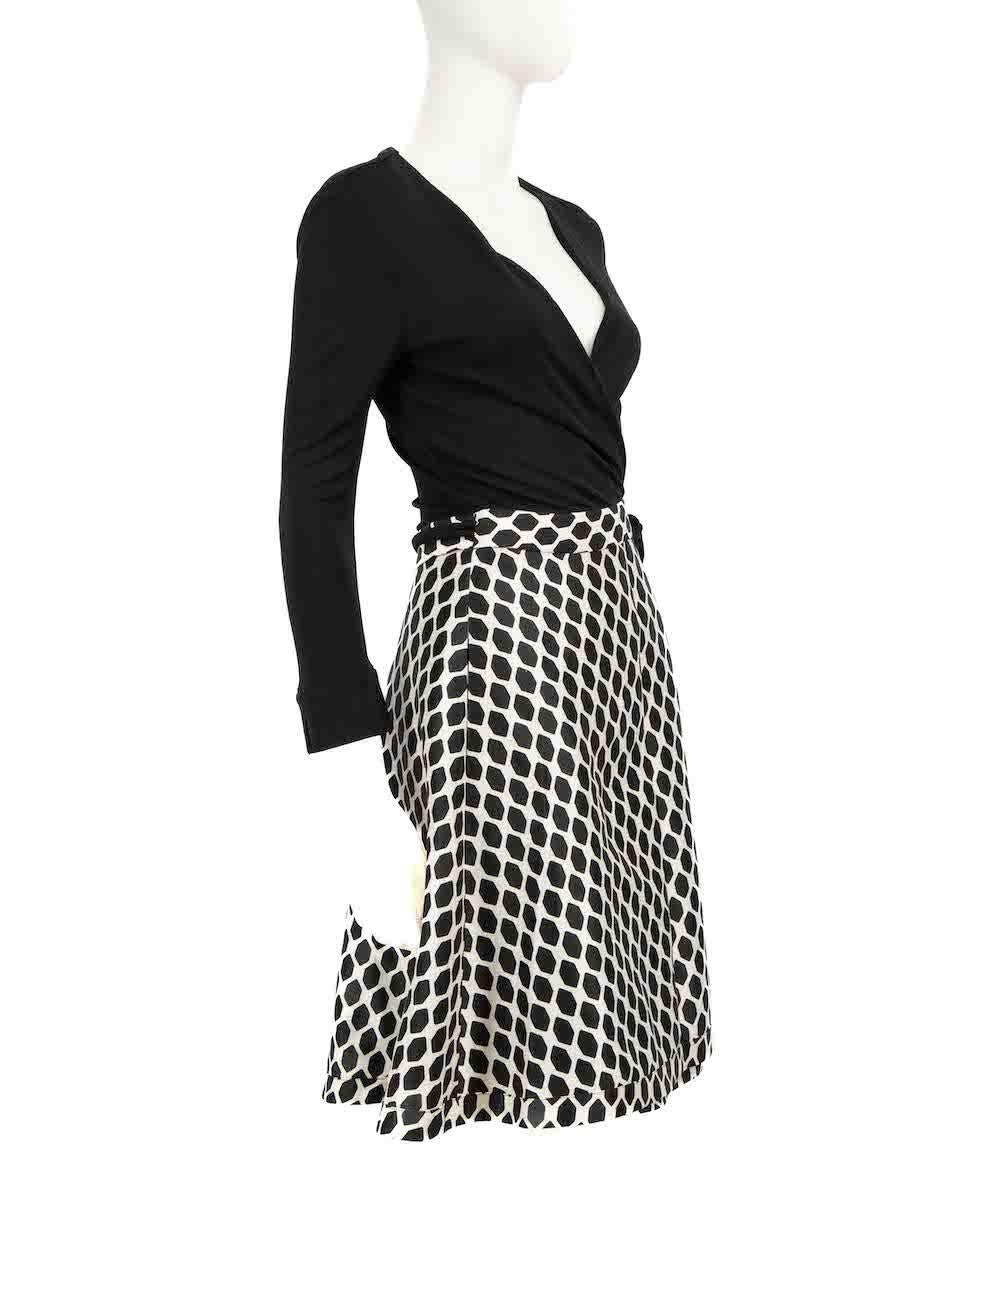 CONDITION is Very good. Minimal wear to dress is evident. Minimal pull to weave on front neckline on this used Diane Von Furstenberg designer resale item.
 
 
 
 Details
 
 
 Black
 
 Wool
 
 Wrap dress
 
 Midi
 
 Long sleeves
 
 Patterned skirt
 
